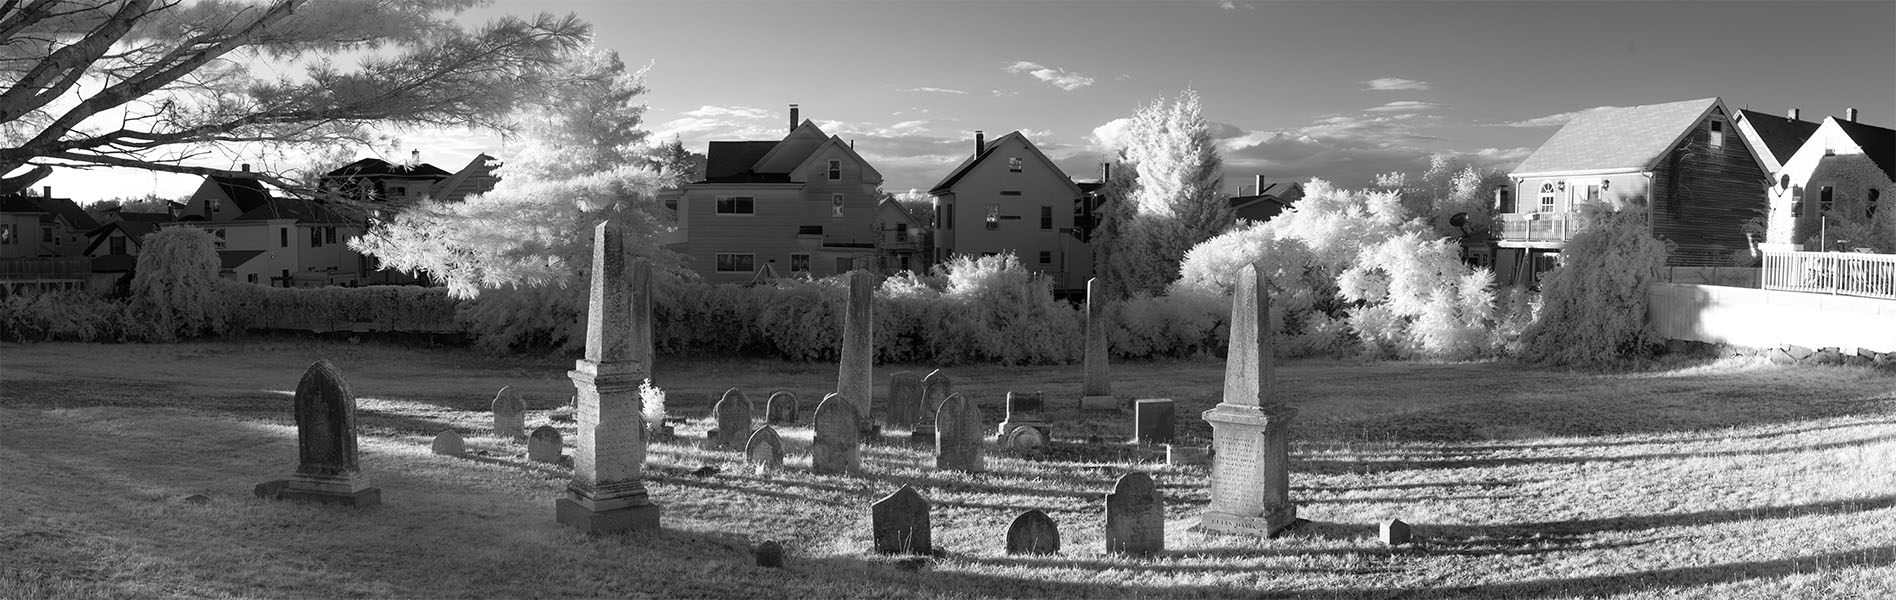 Infrared Panorama of New England Cemetary with Houses in Background.